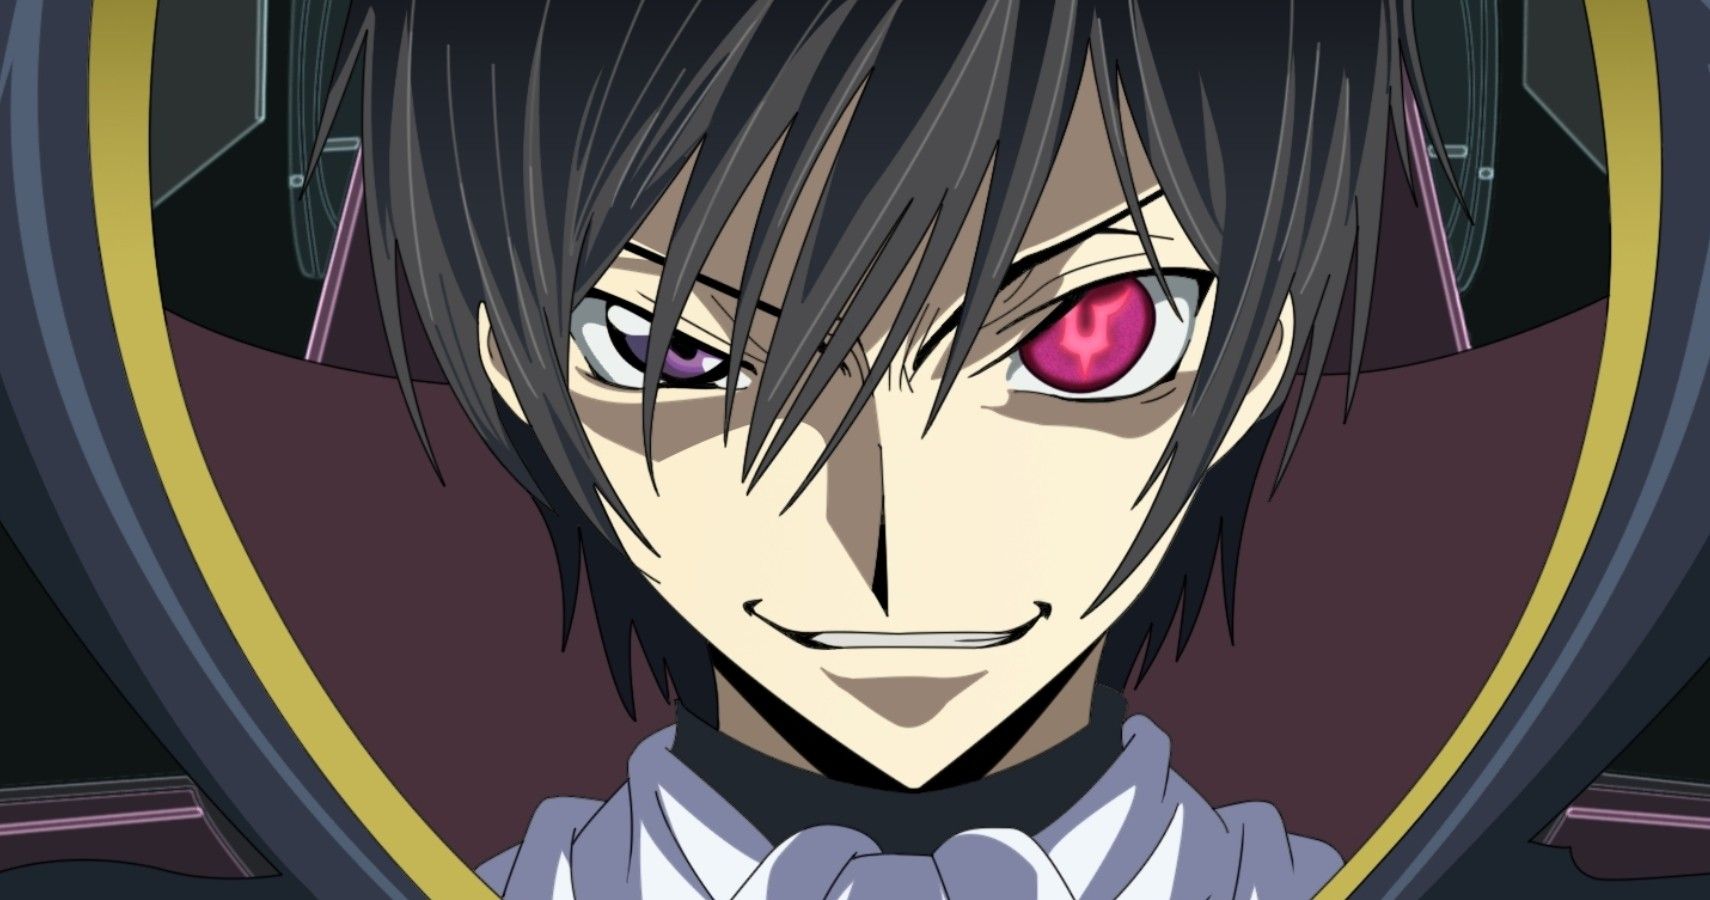 Code Geass: The 10 Best Quotes Said By Lelouch Lamperouge/Zero